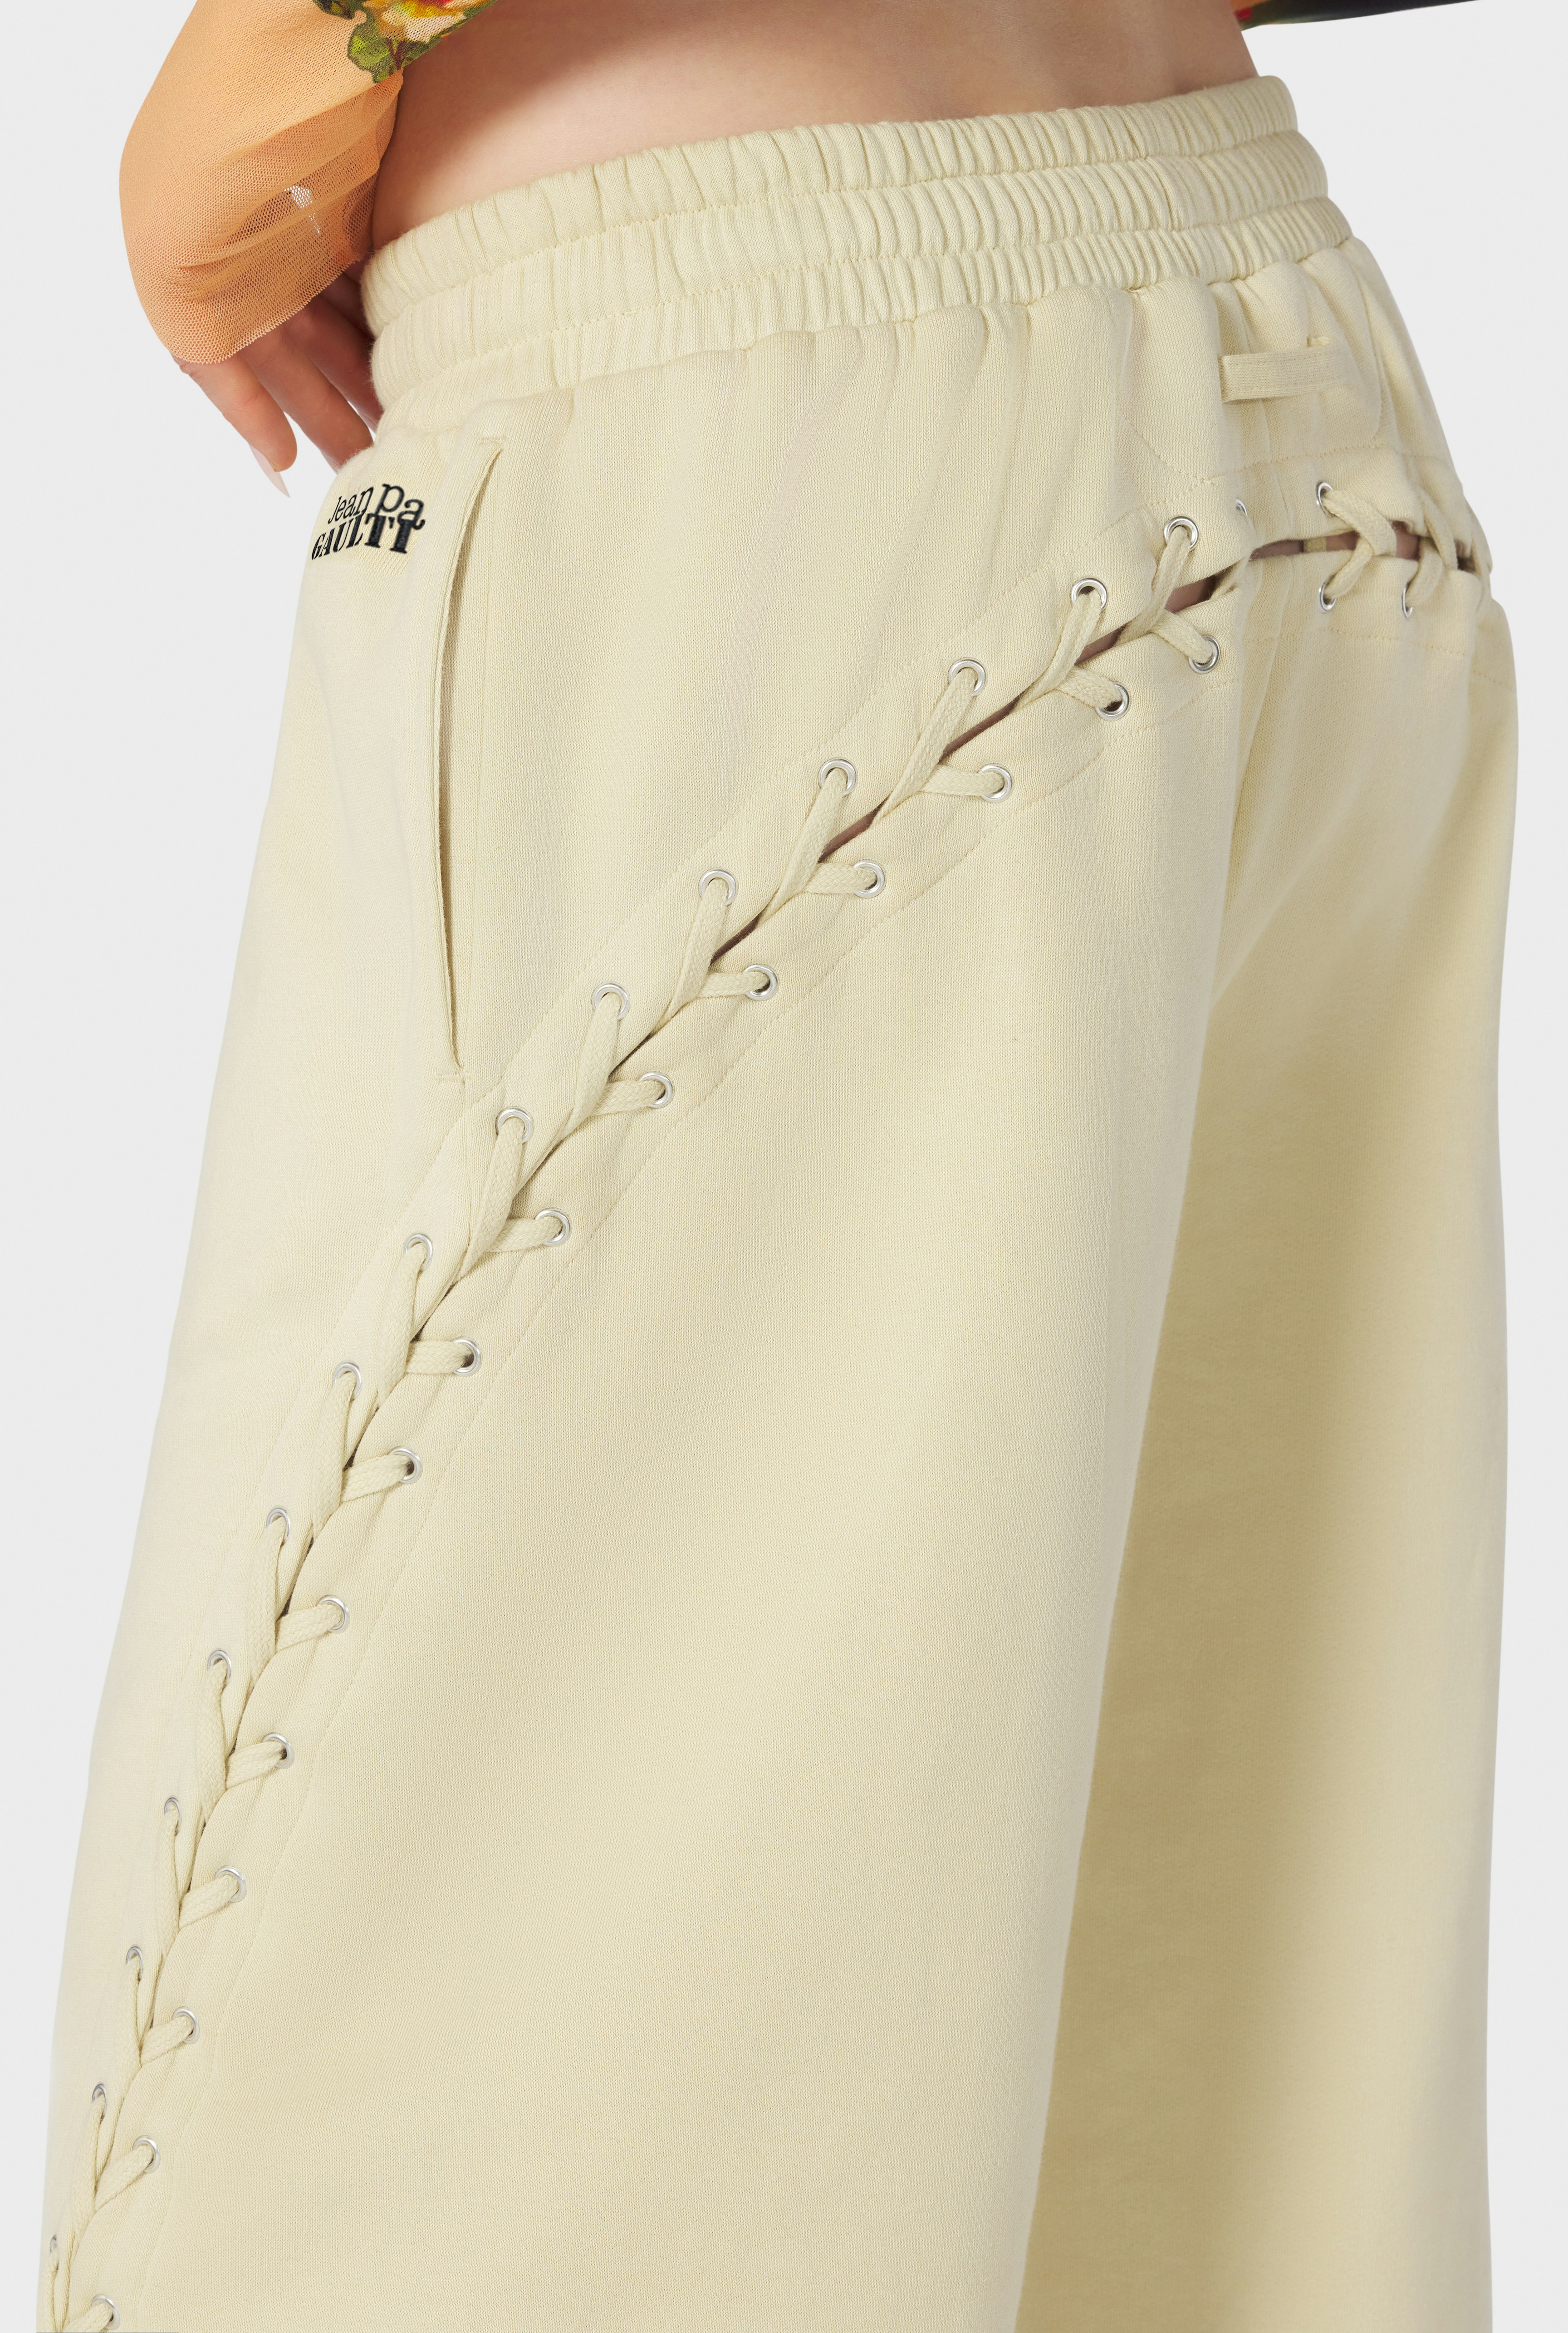 The Beige Lace-Up JPG Sweatpants hover